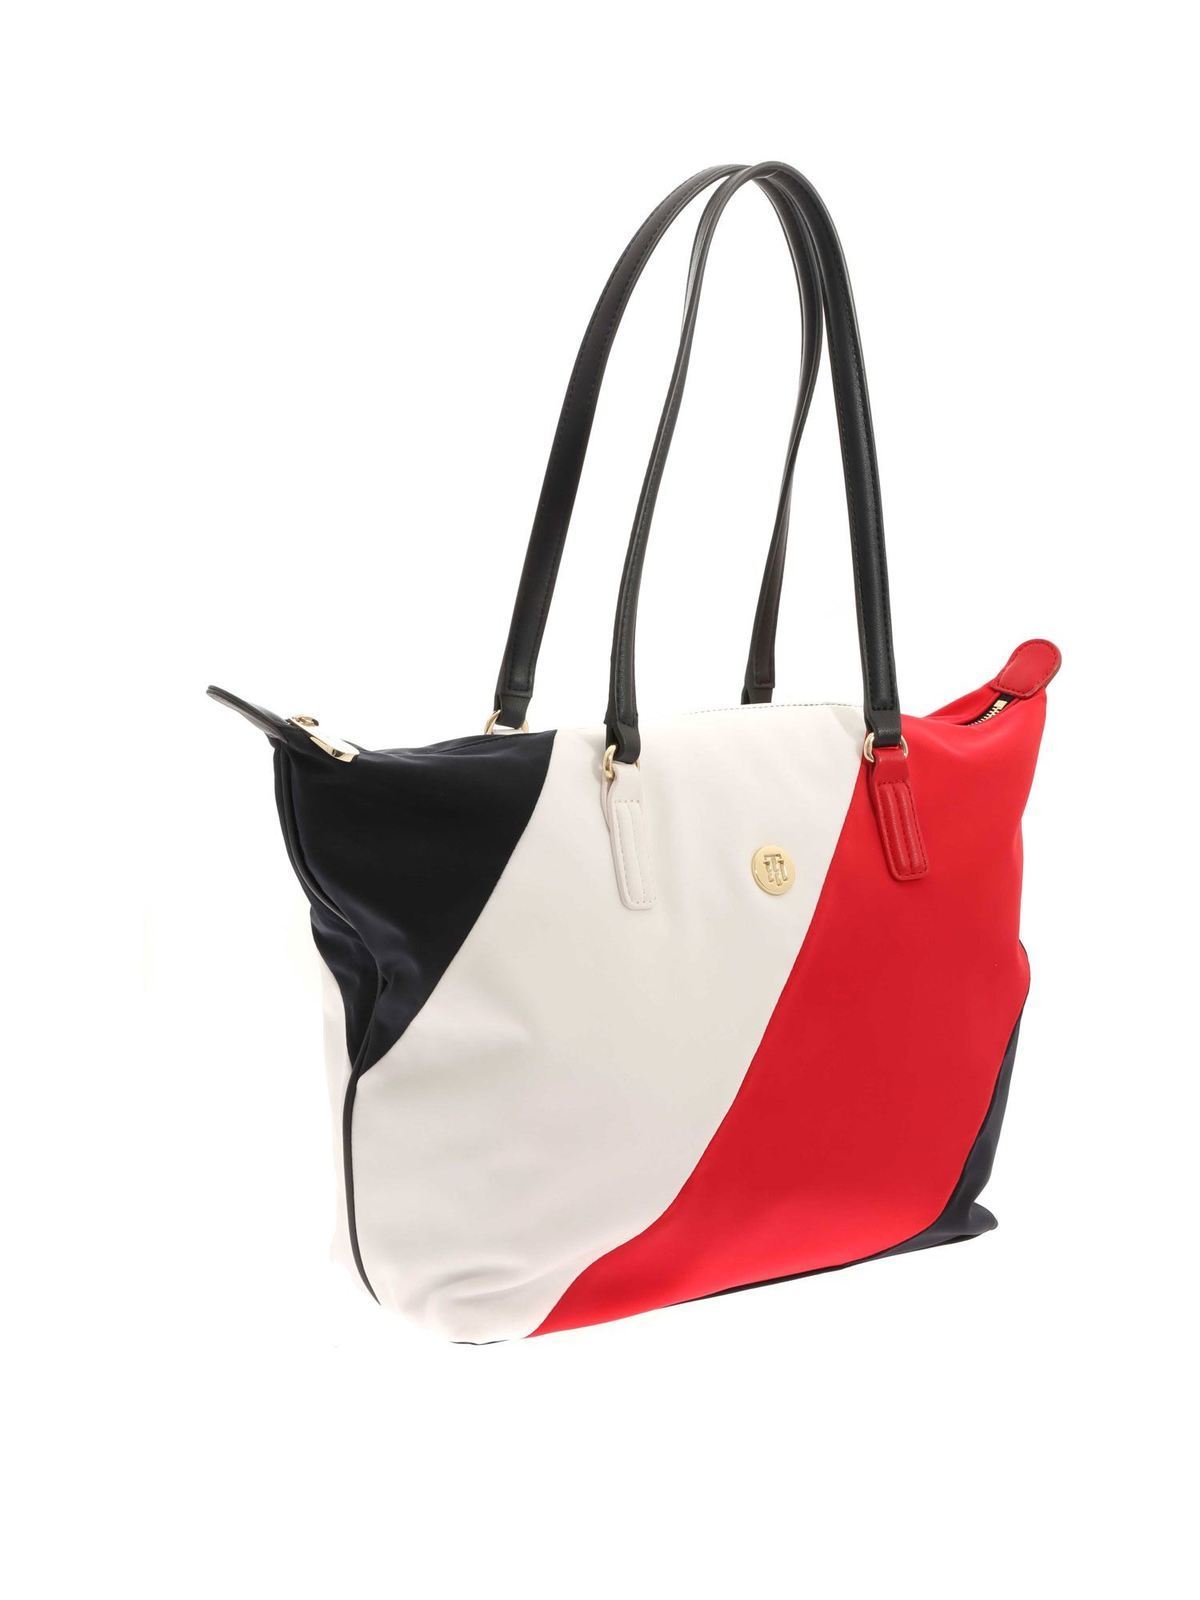 bibel dosis skal Totes bags Tommy Hilfiger - Poppy Tote Stripes shopper bag in blue and wh -  AW0AW096900GY